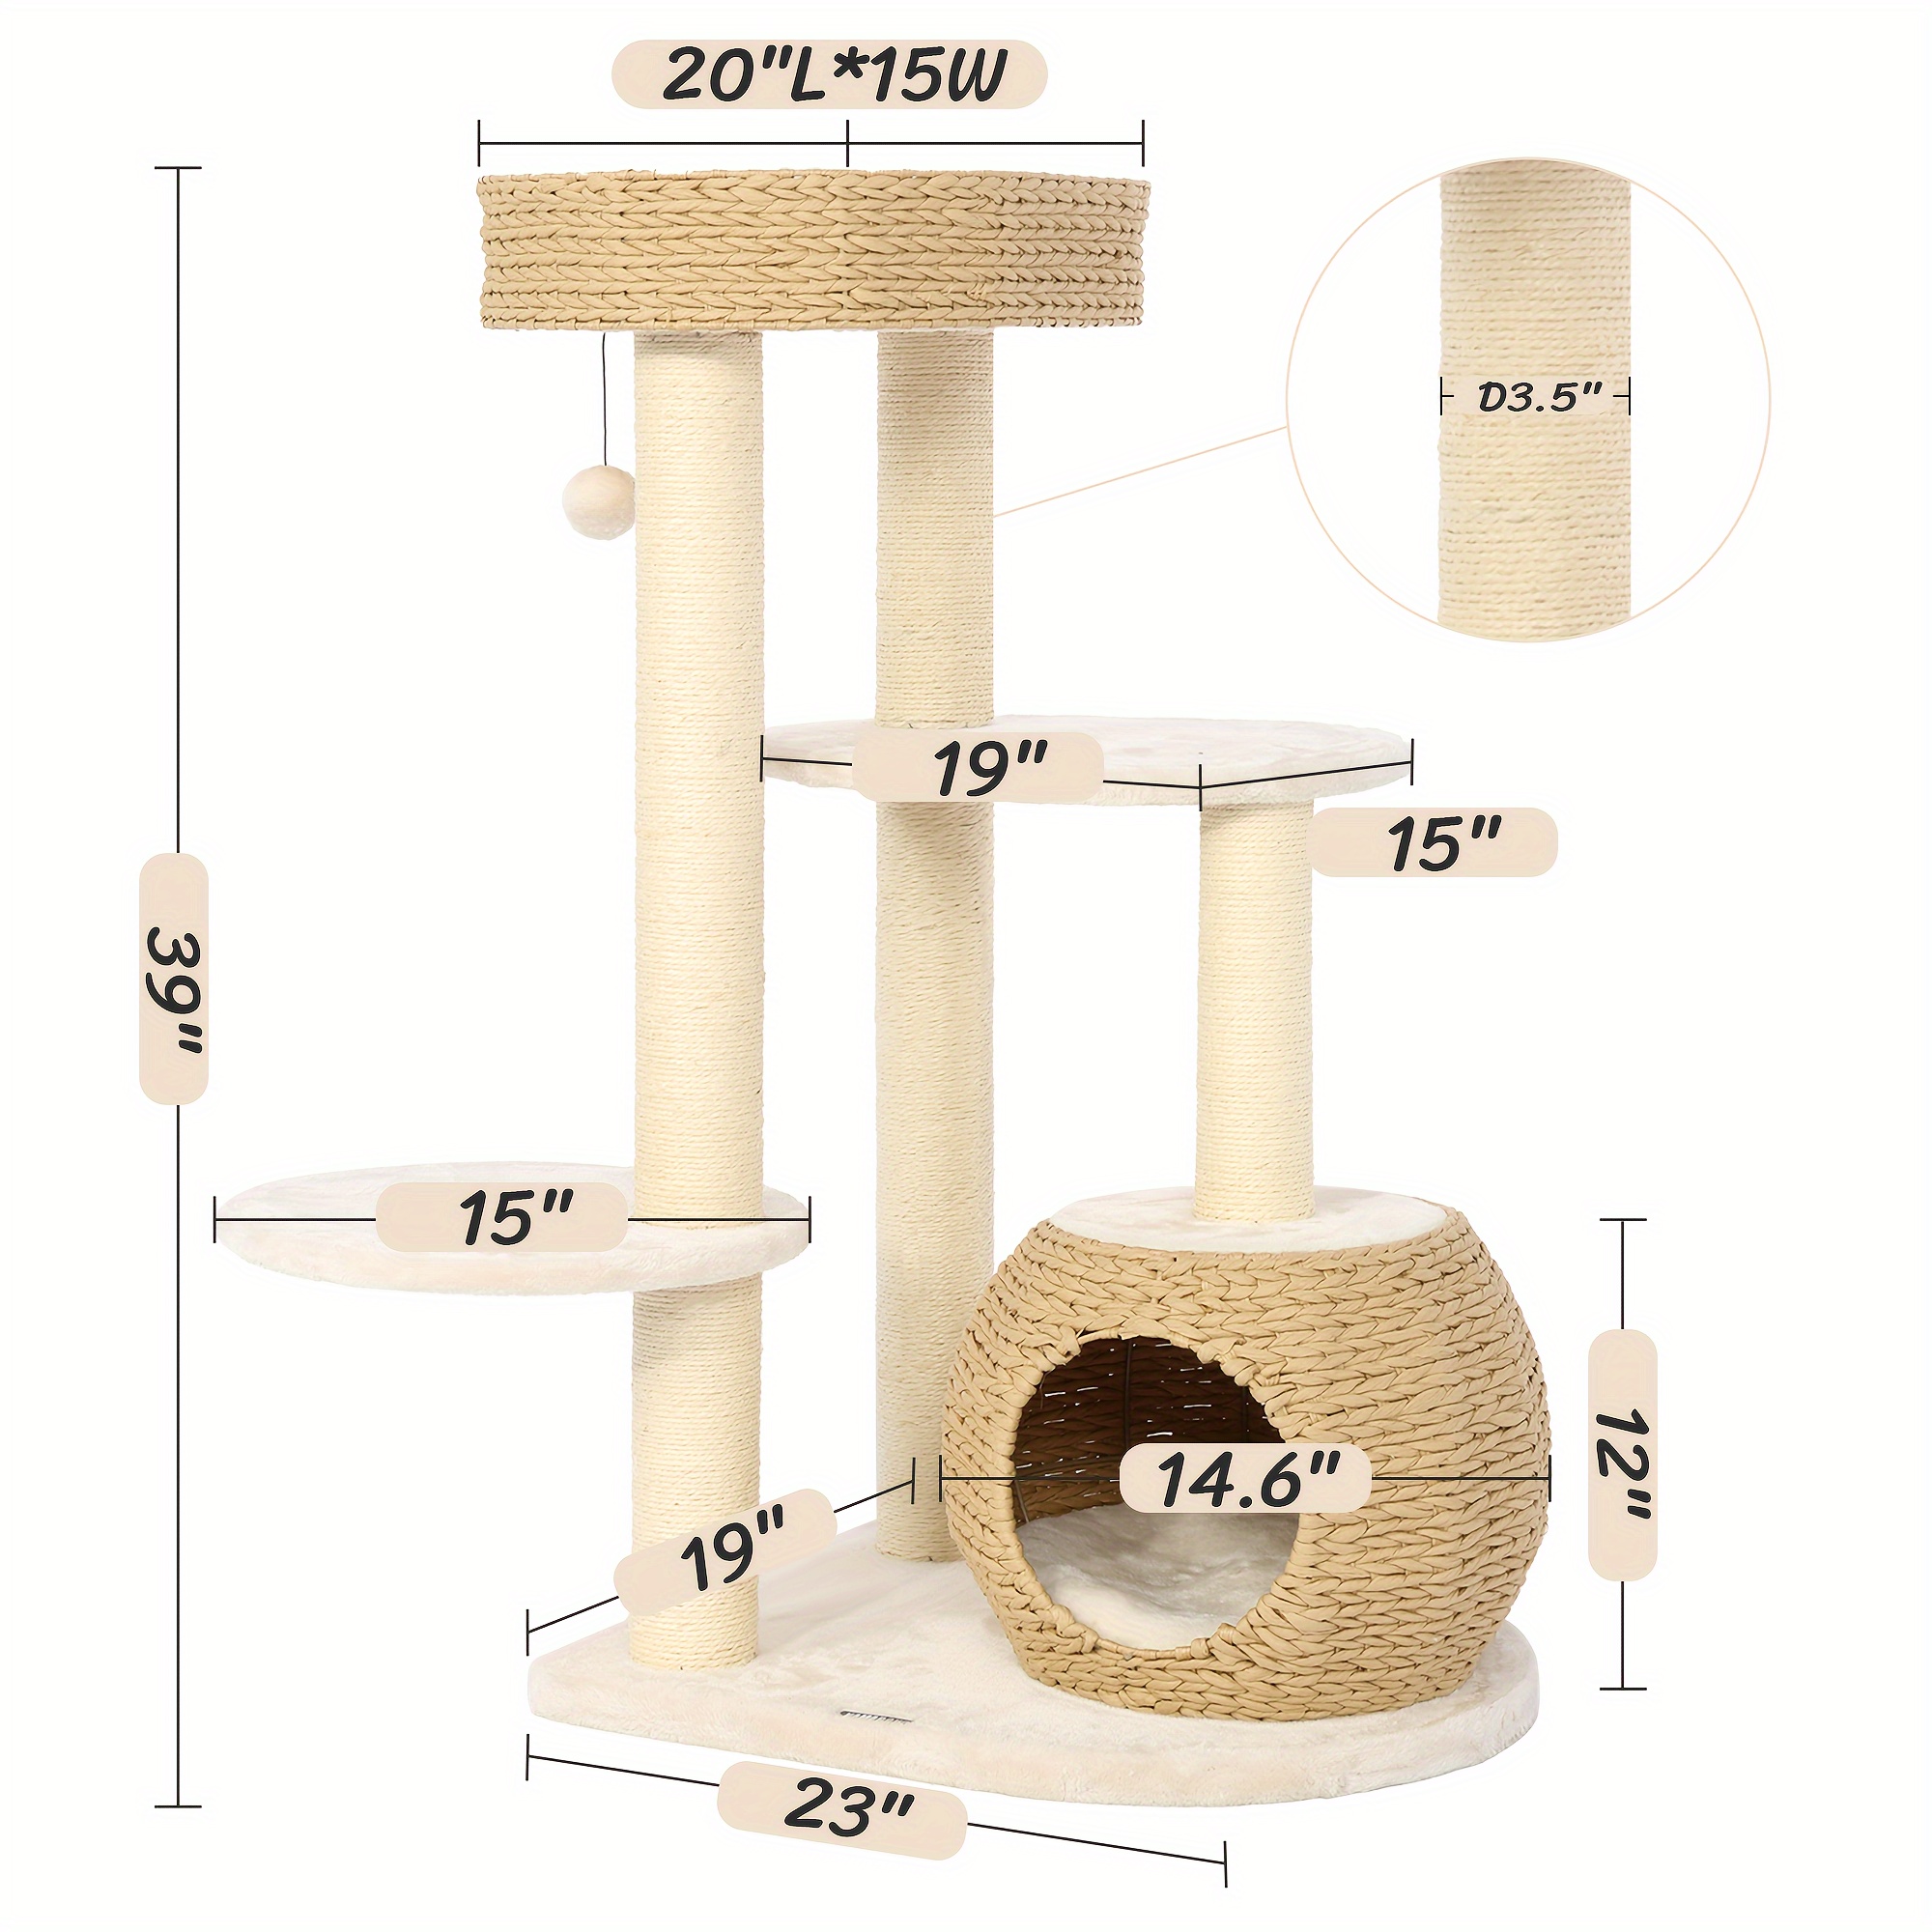 

Cat Tree For Indoor Cats, Modern Cat Tree Tower W/natural Sisal Scratching Posts, Hand-woven Condo & Top Perch For Kittens Climb Play & Rest